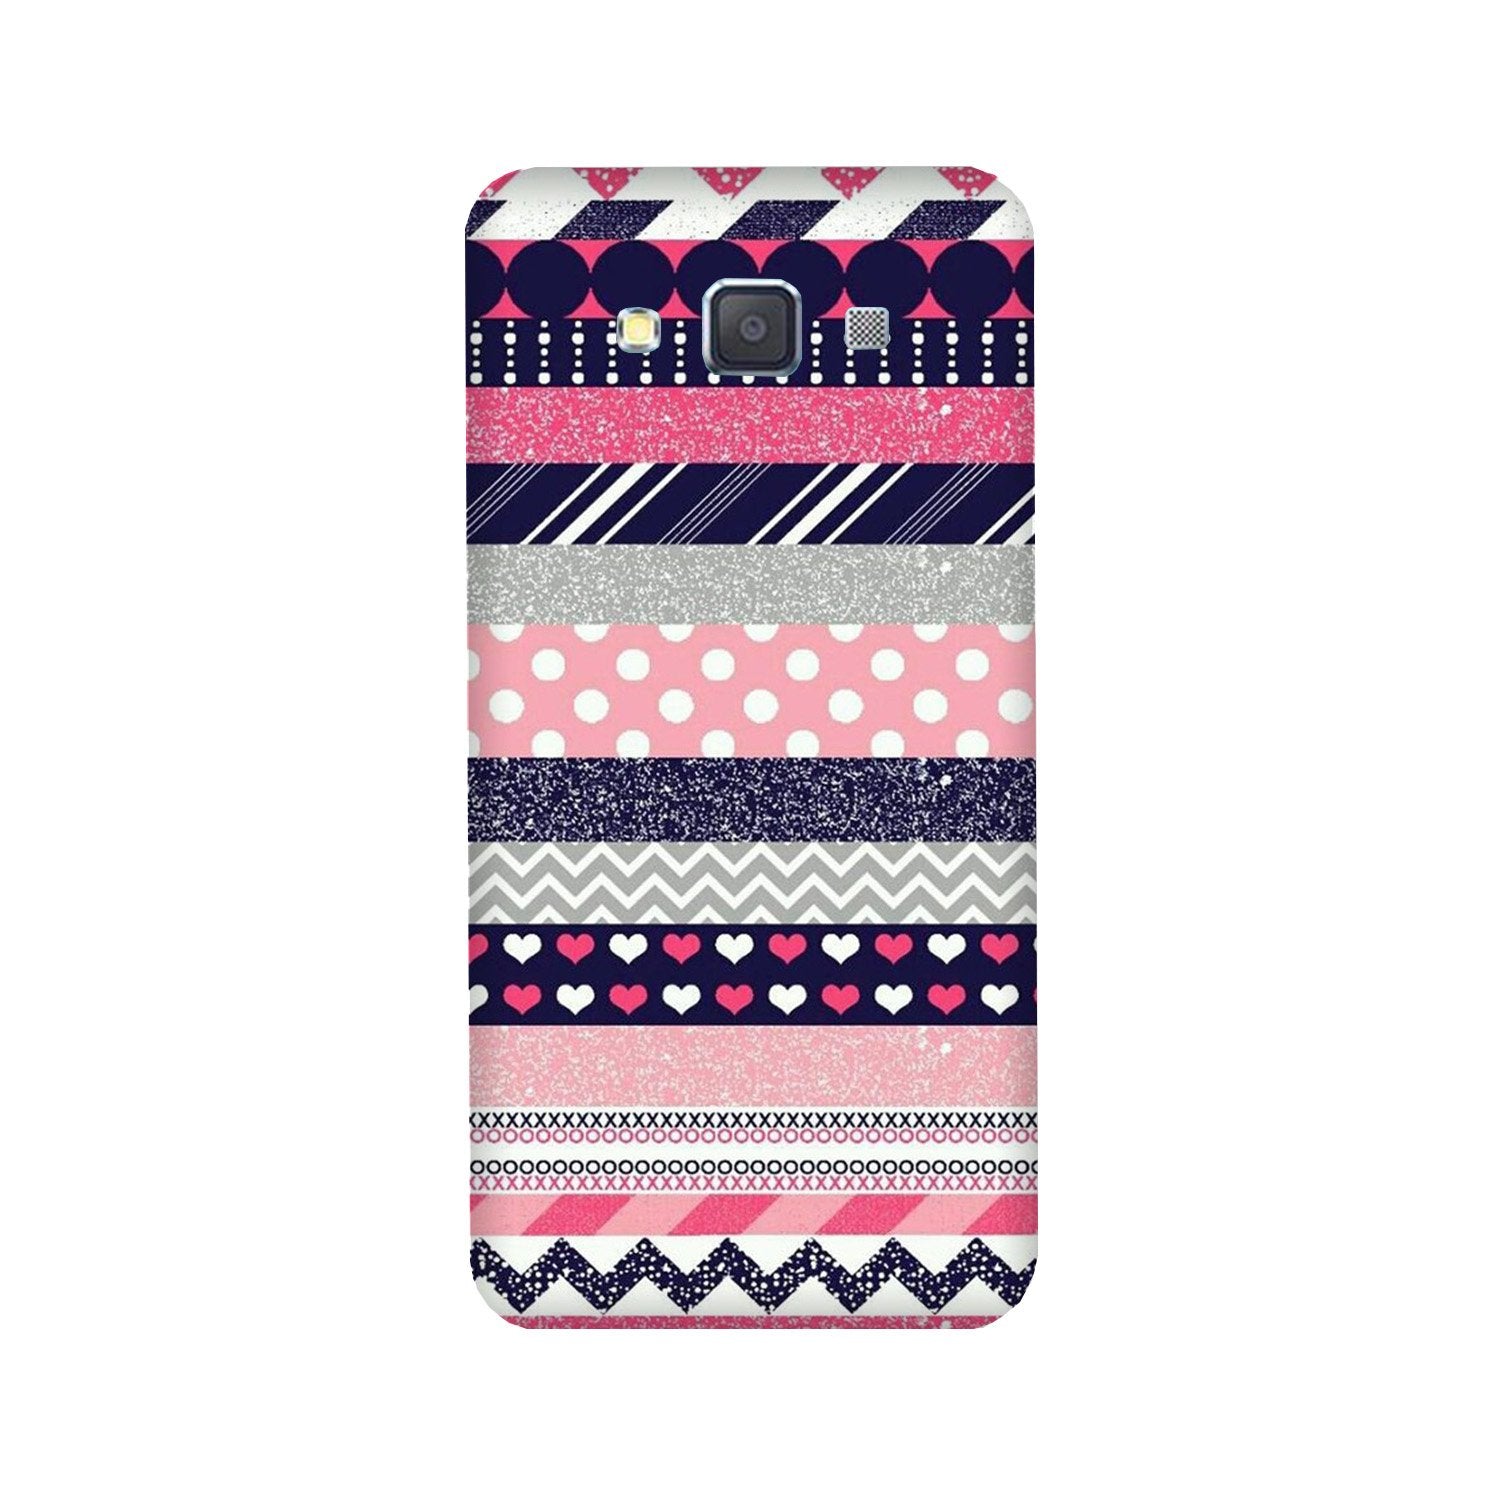 Pattern3 Case for Galaxy Grand Prime